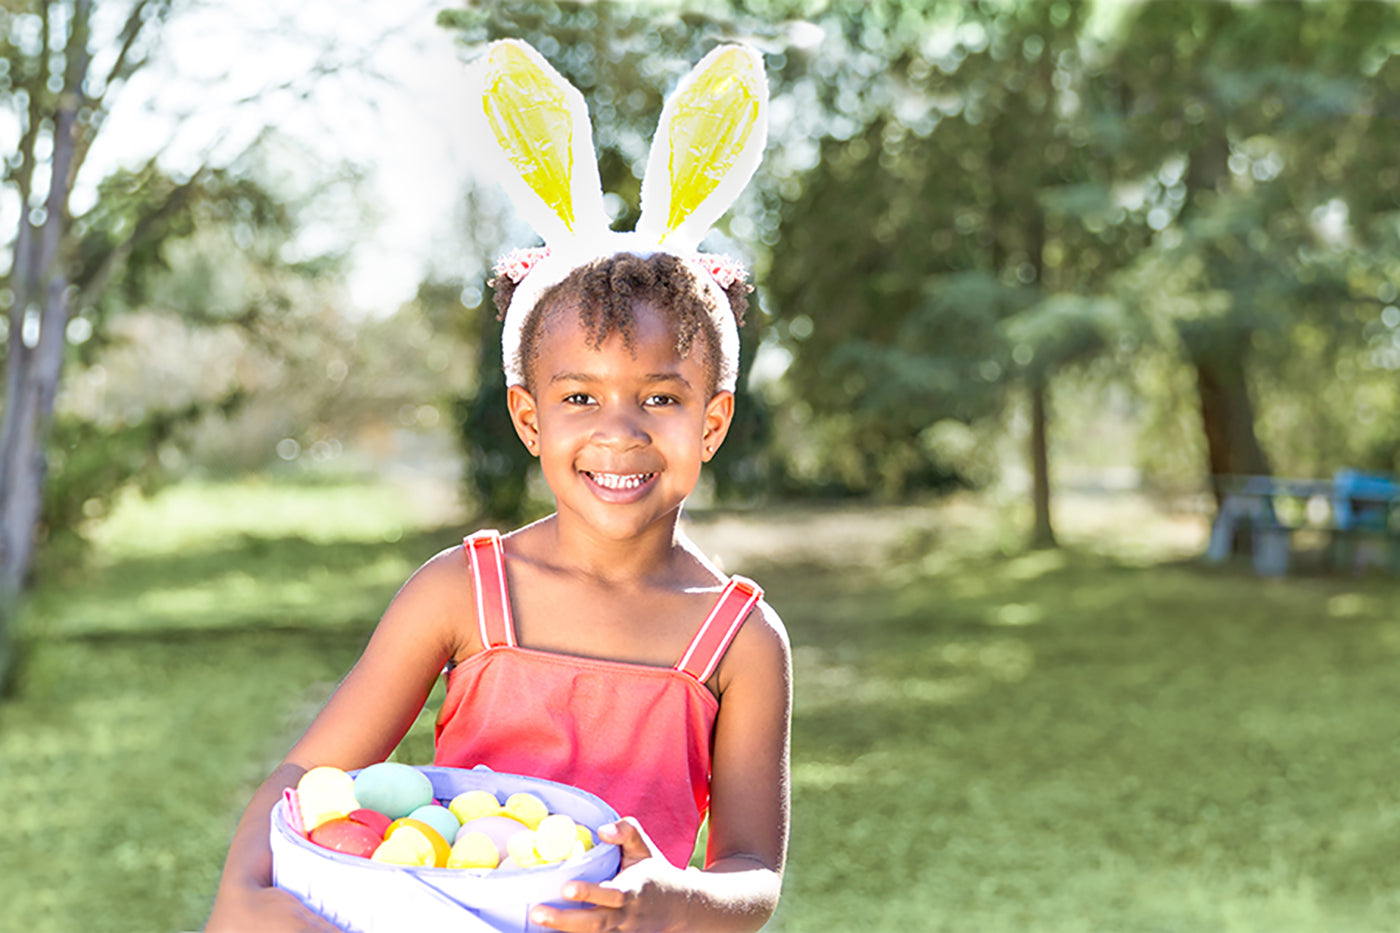 Easter Basket Ideas For Kids (With No Toys or Candy) – SheKnows